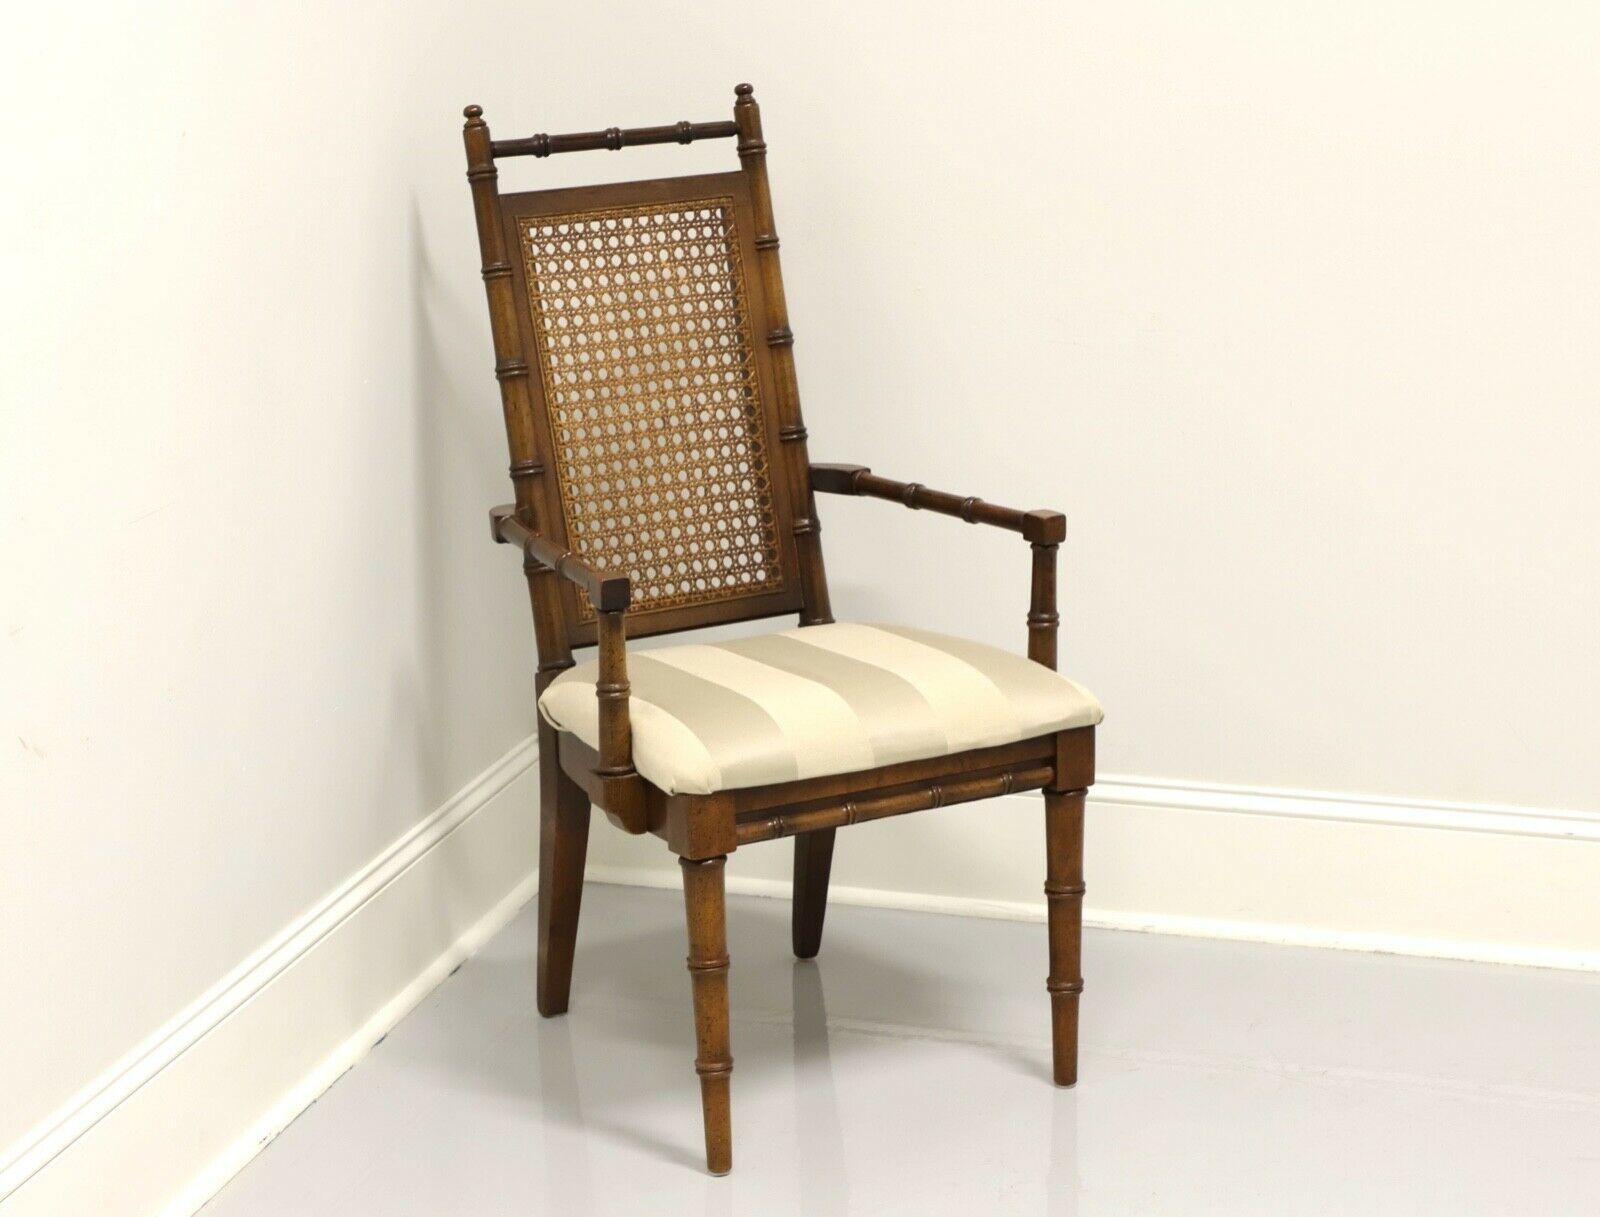 AMERICAN FURNITURE CO Mid 20th Century Vintage Faux Bamboo & Cane Armchair For Sale 2